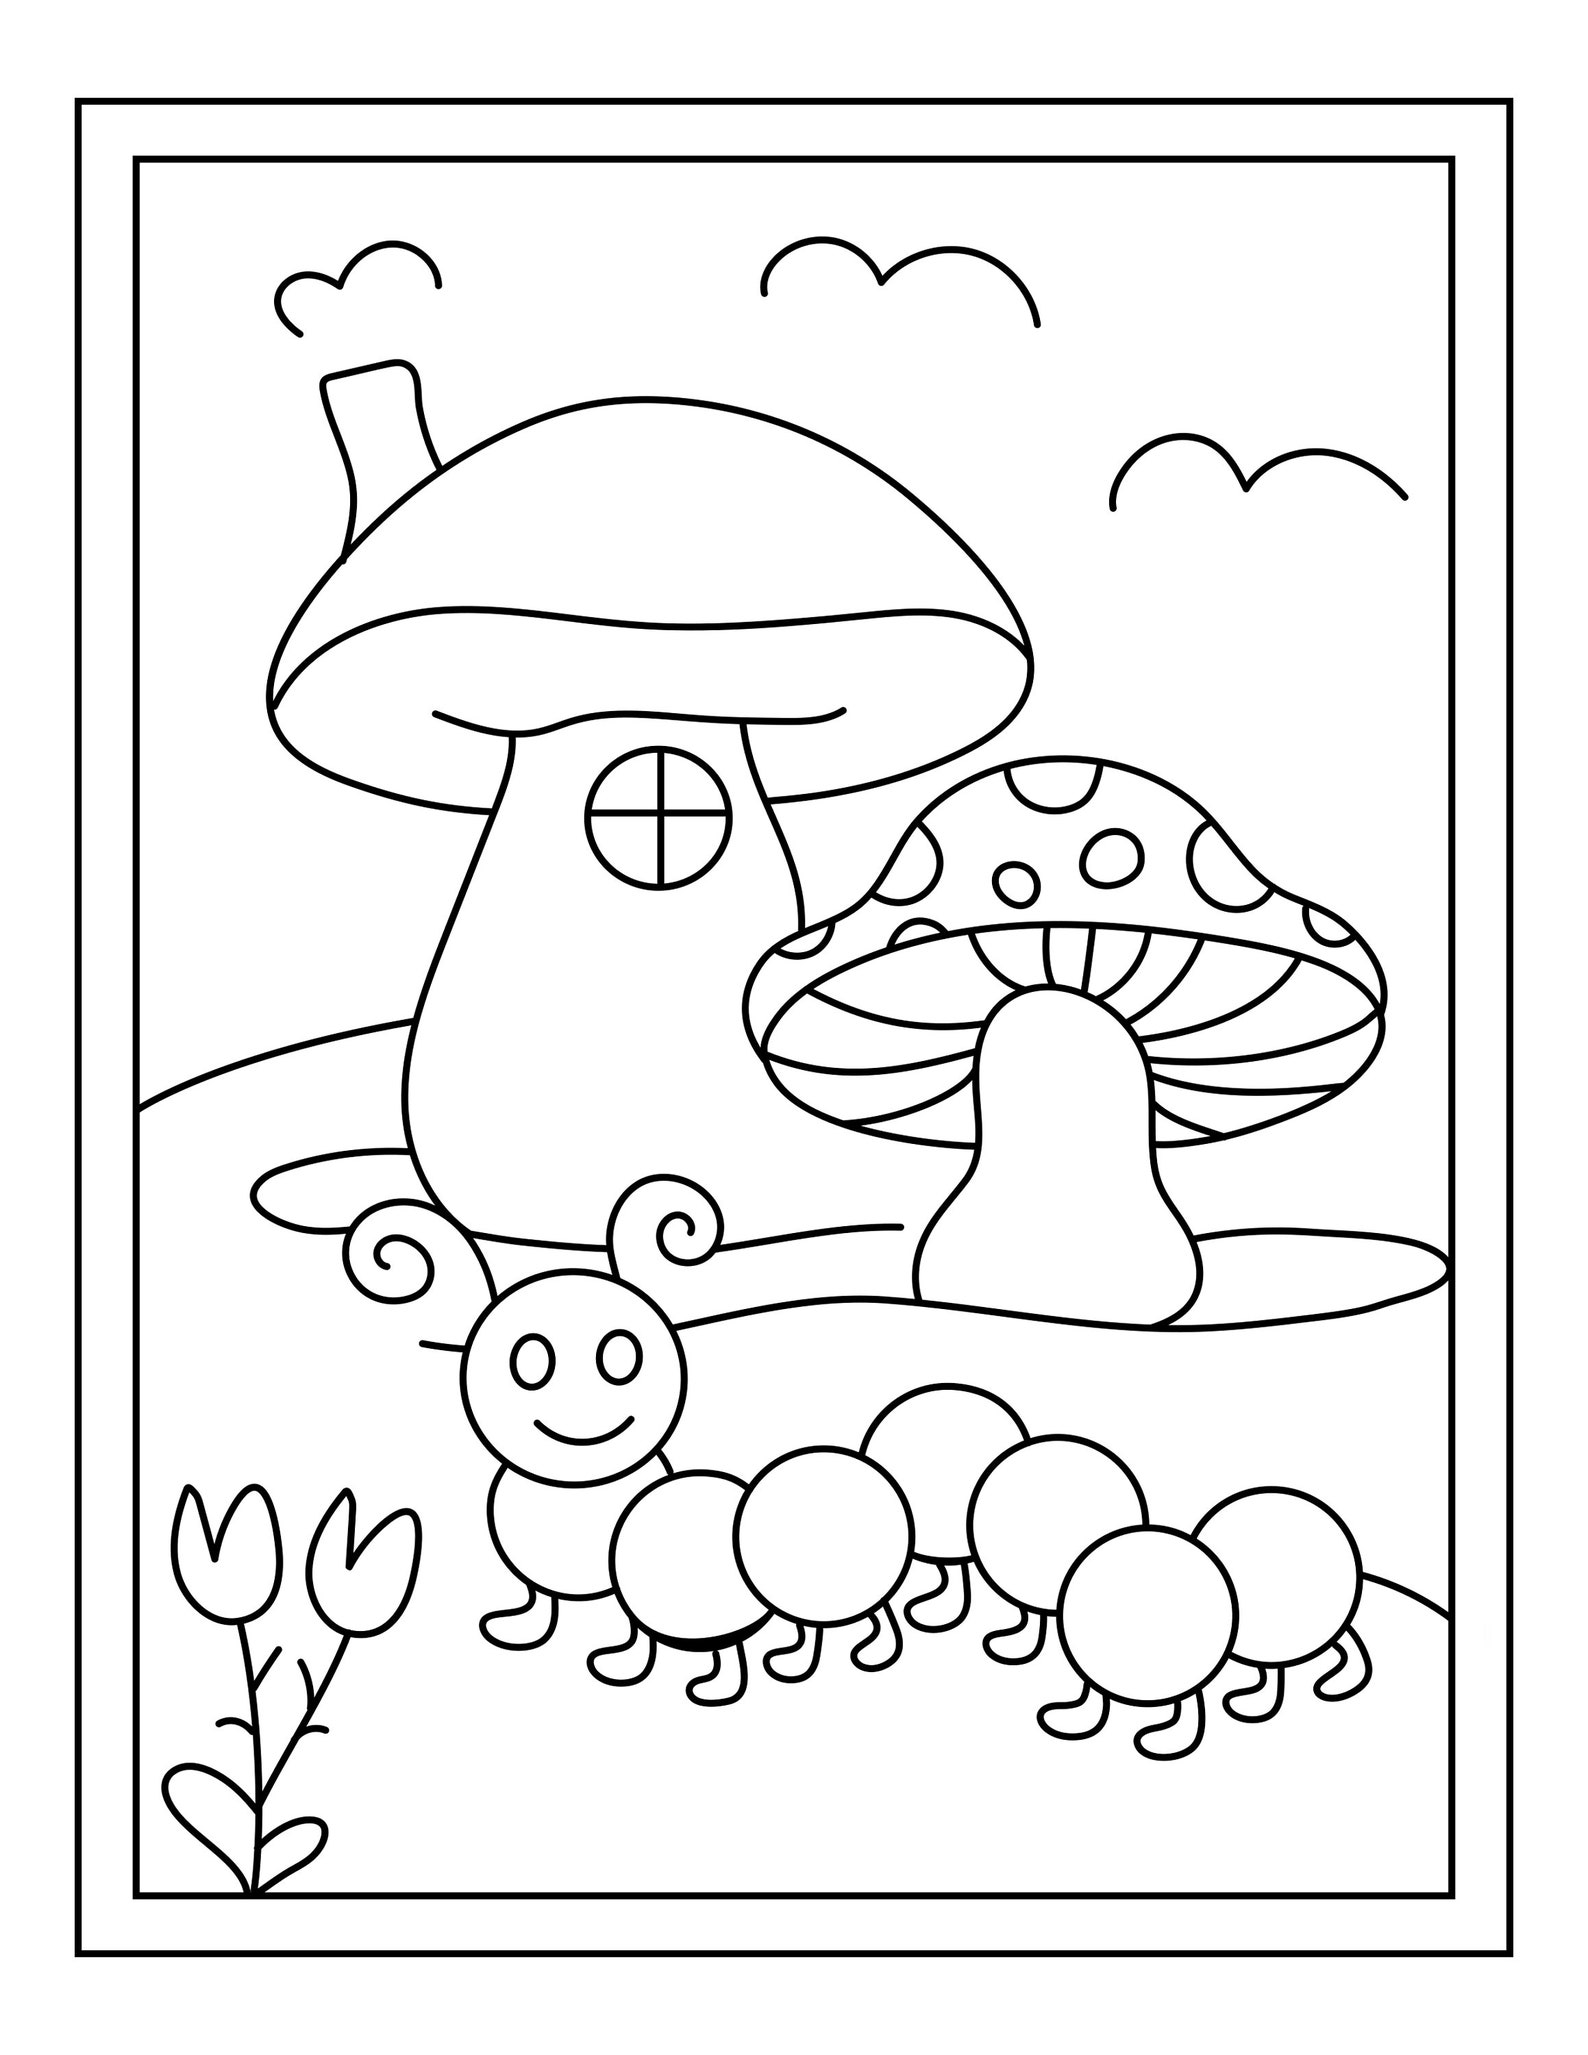 nature-printable-16-coloring-pages-etsy